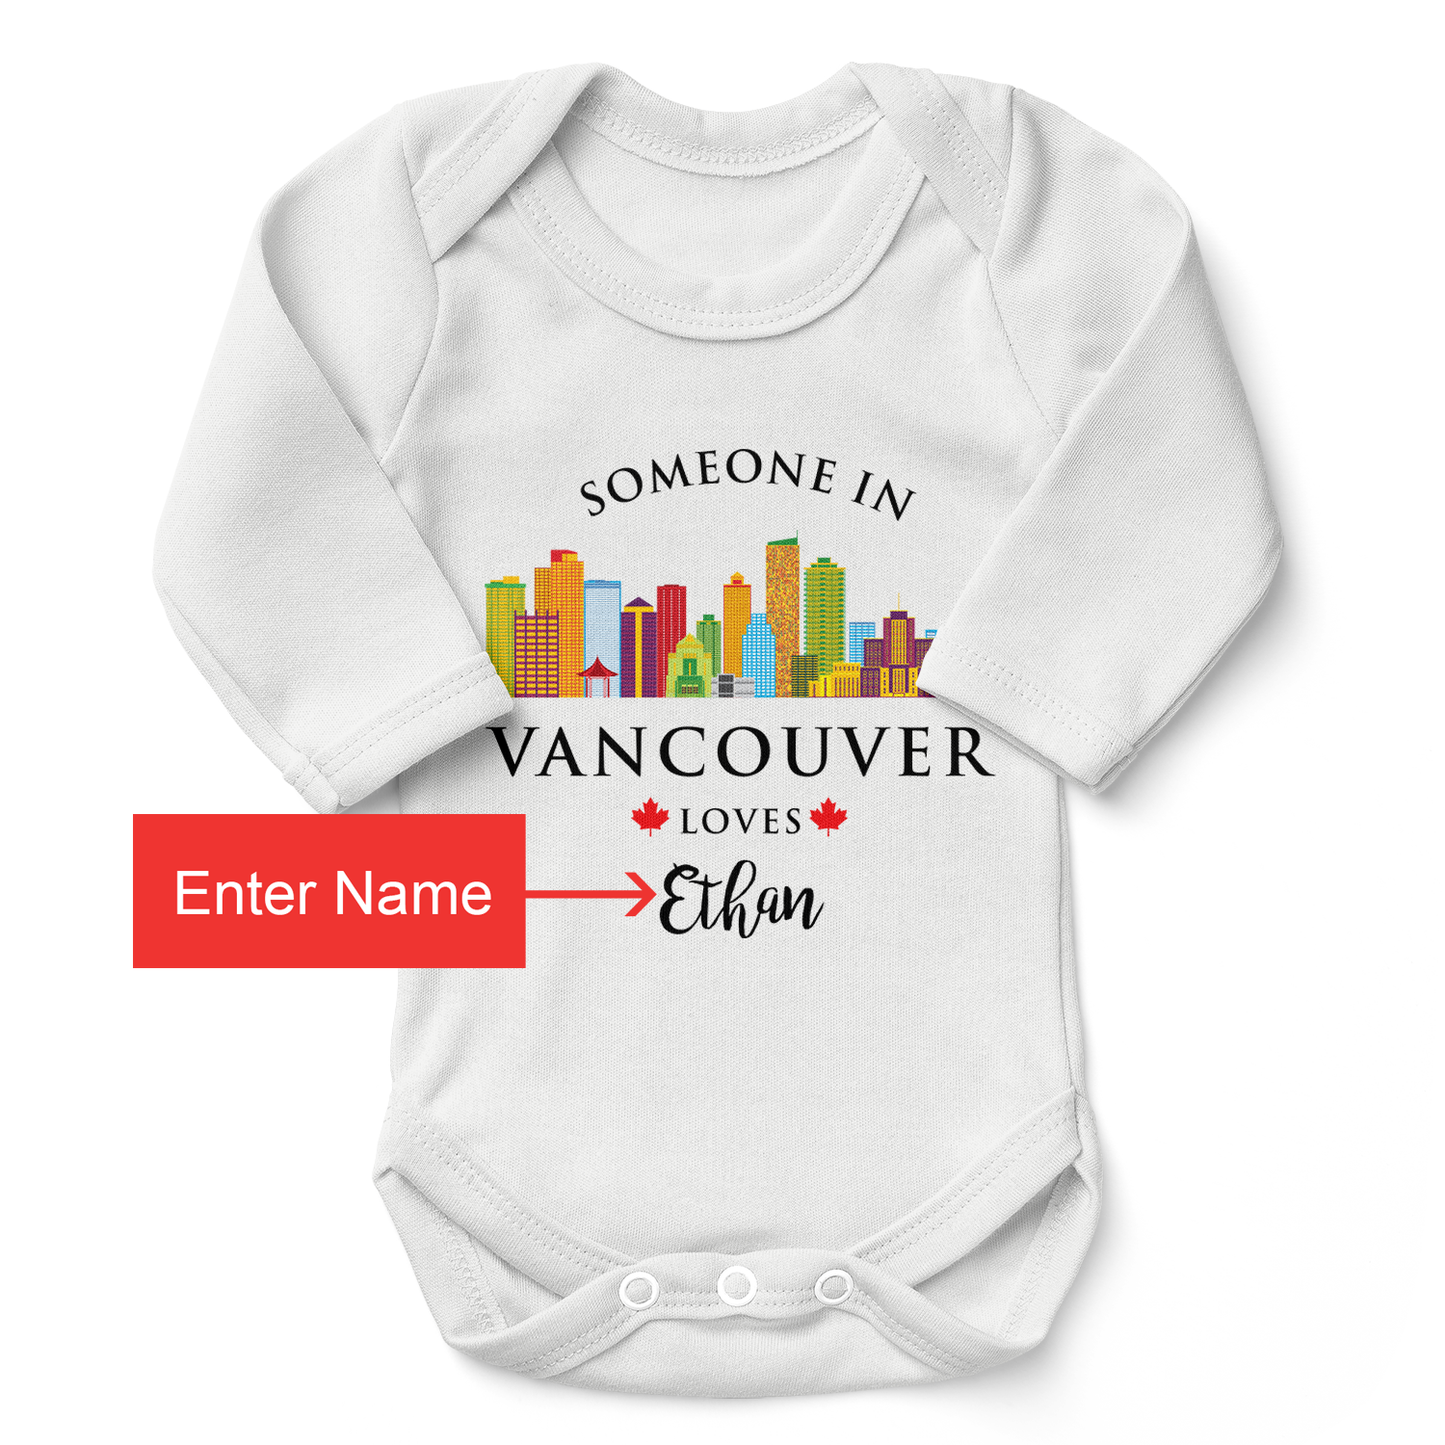 [Personalized] Endanzoo Organic Long Sleeve Baby Bodysuit - Someone in Vancouver Loves You